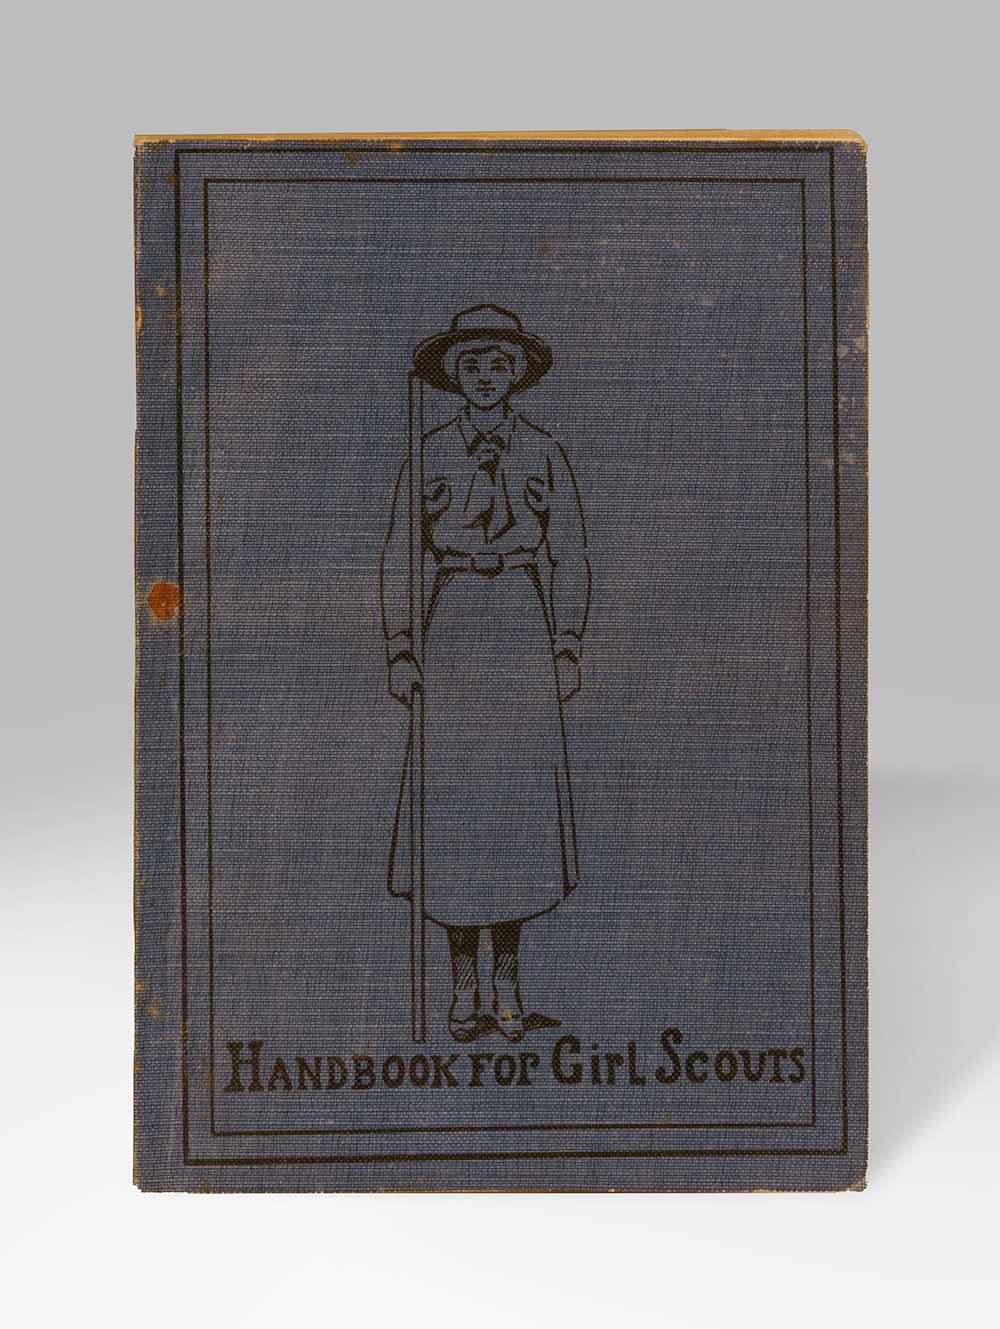 Closed book with a dark grey cover illustrated with a line drawing of a girl wearing a uniform hat, shirt and skirt. Text: 'Handbook for Girl Scouts'